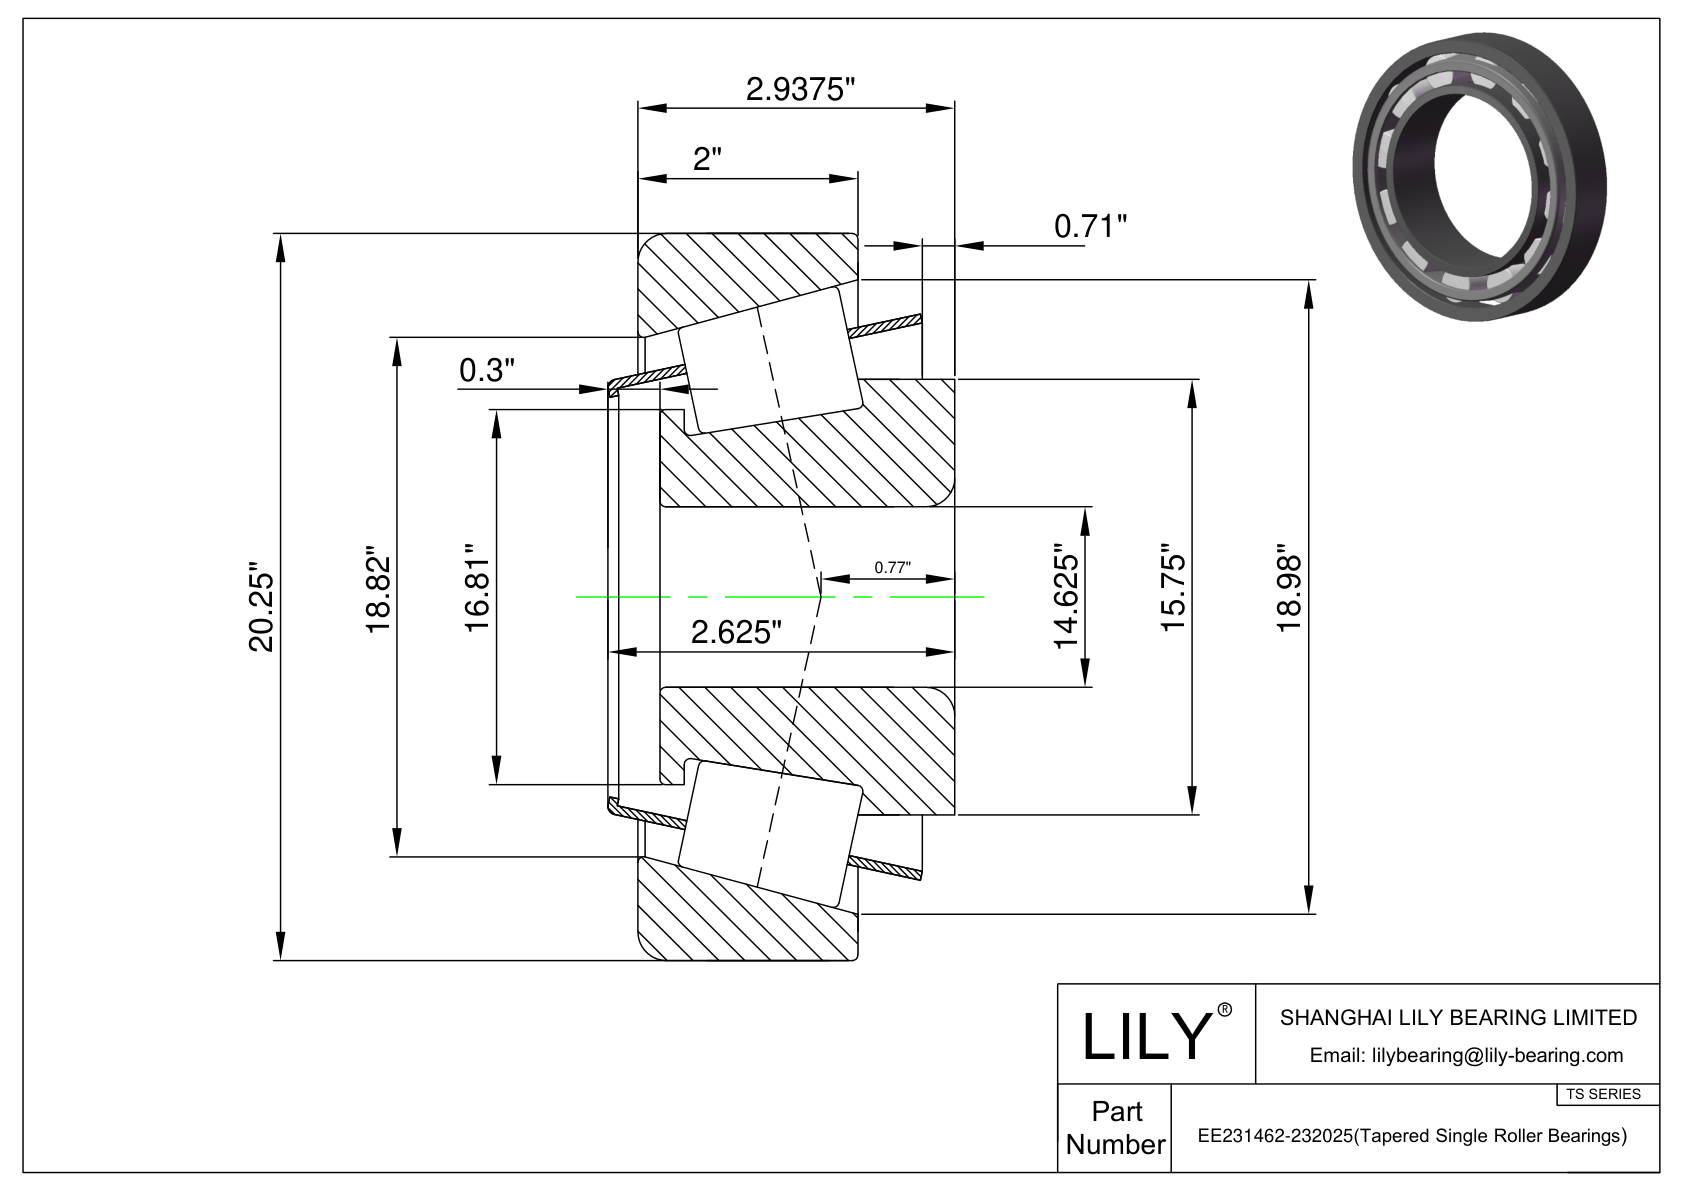 EE231462-232025 TS (Tapered Single Roller Bearings) (Imperial) cad drawing